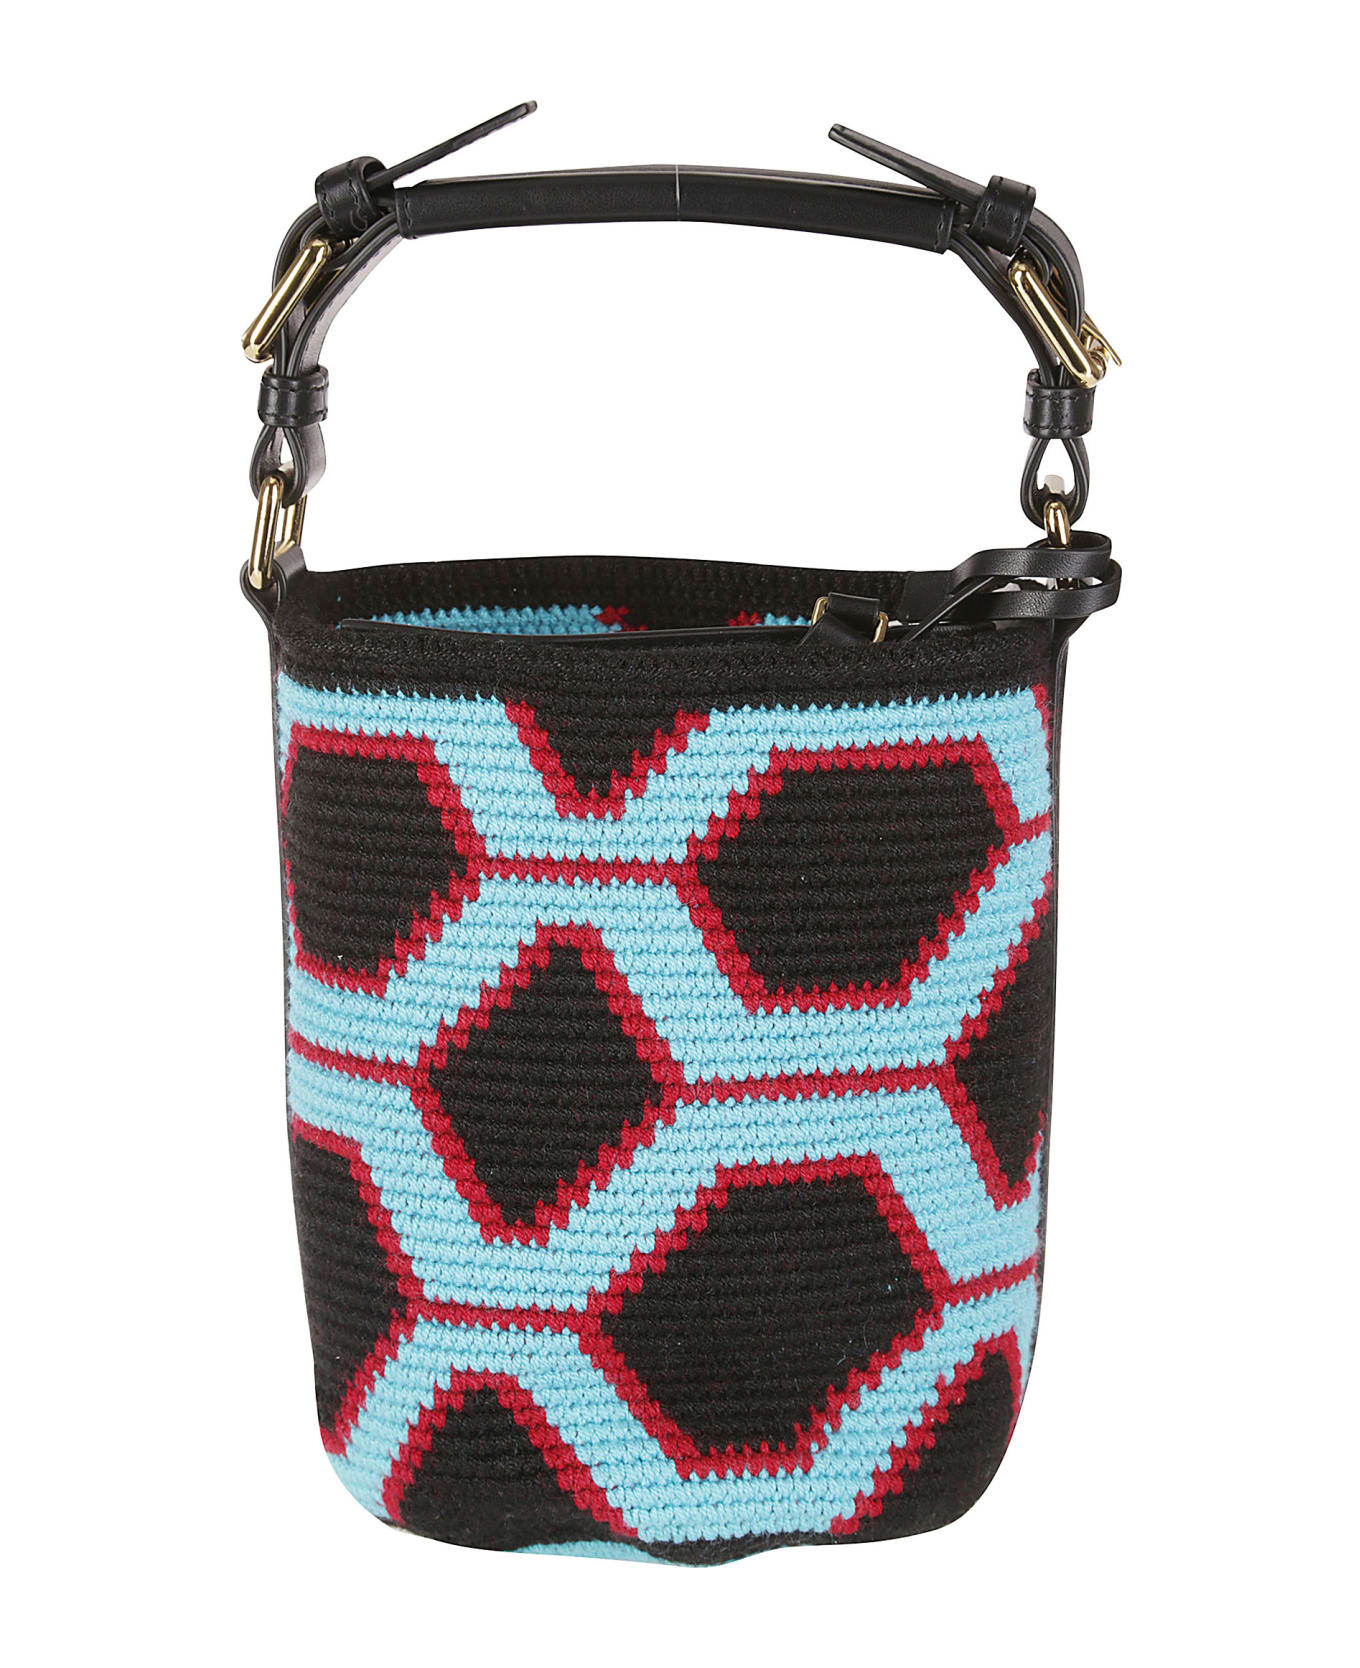 Colville Small Hexagon Cylinder Bag - TURQUOISE/RED/BLACK トートバッグ